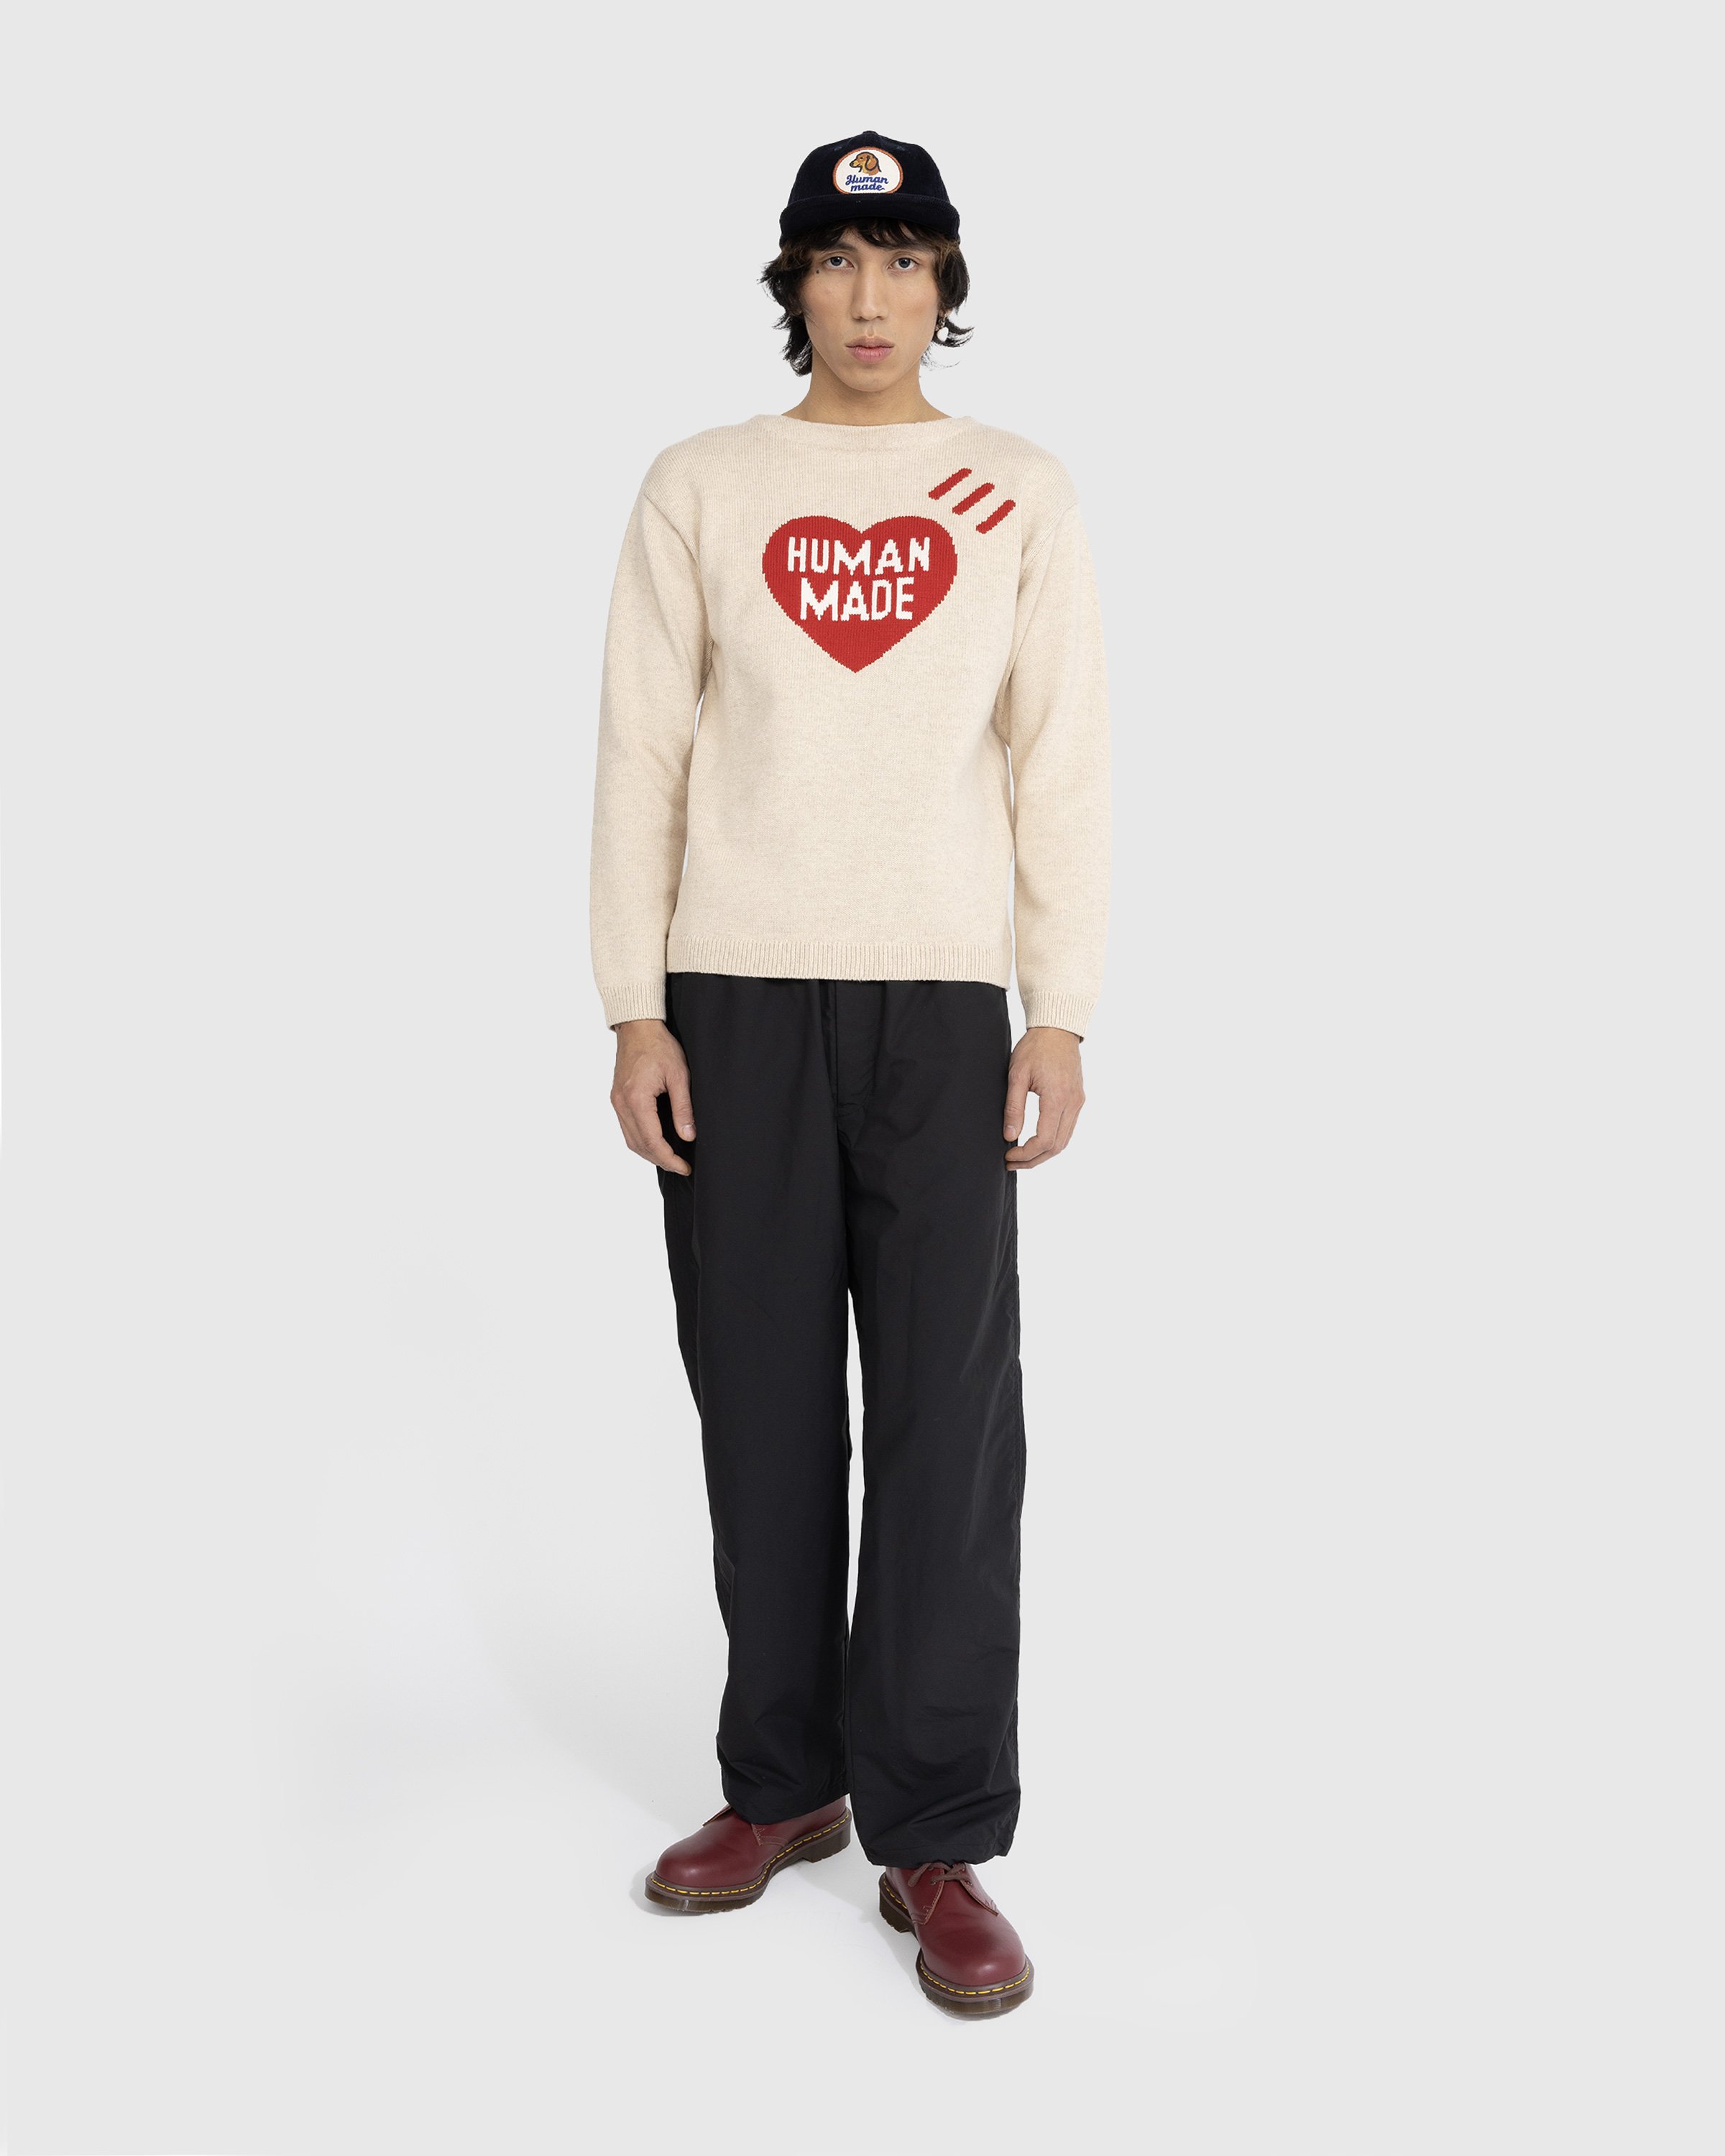 Human Made - Heart Knit Sweater Beige - Clothing - Beige - Image 4